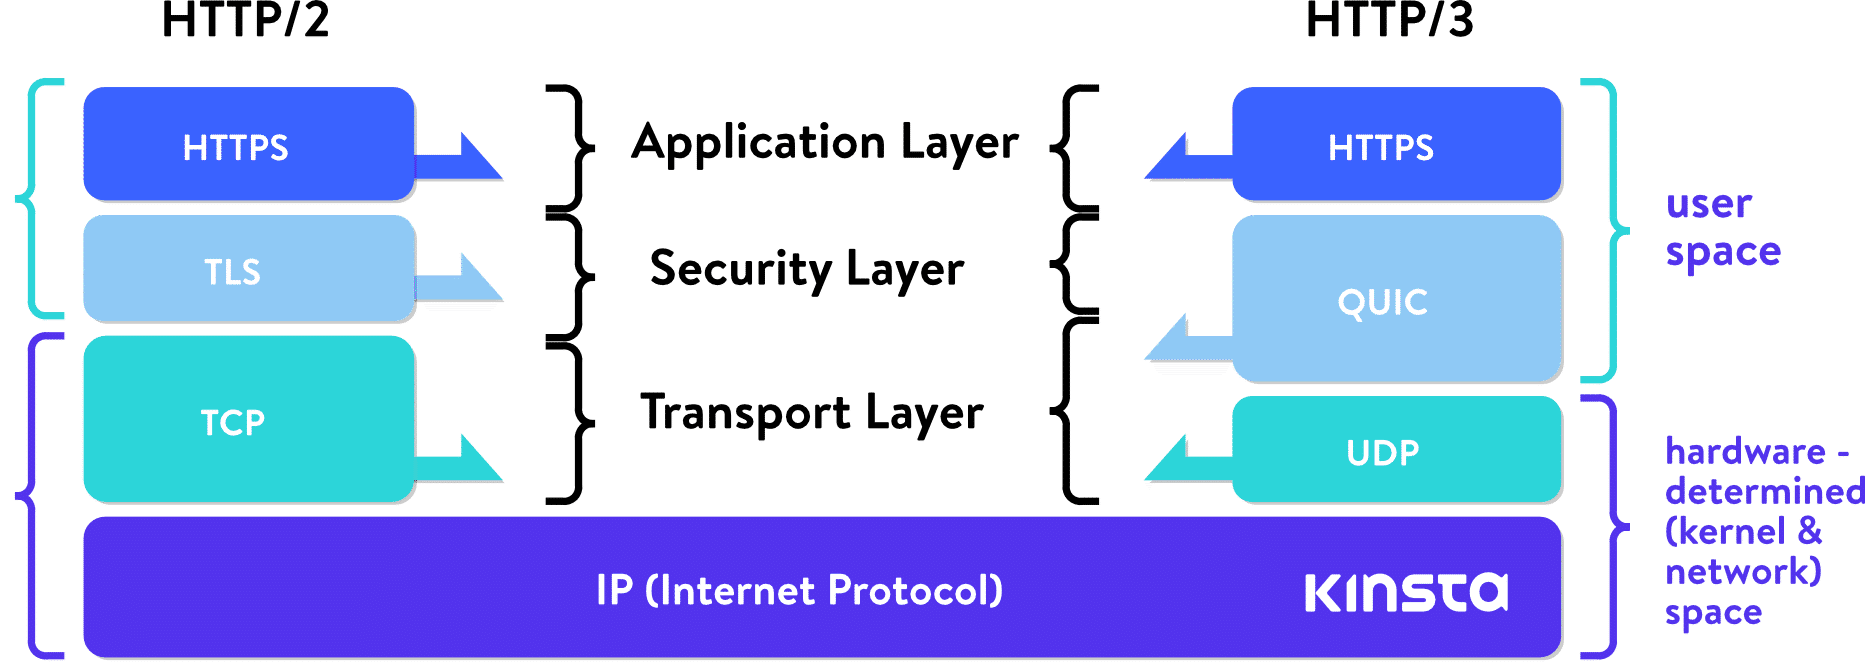 HTTP/2 stack versus HTTP/3 stack